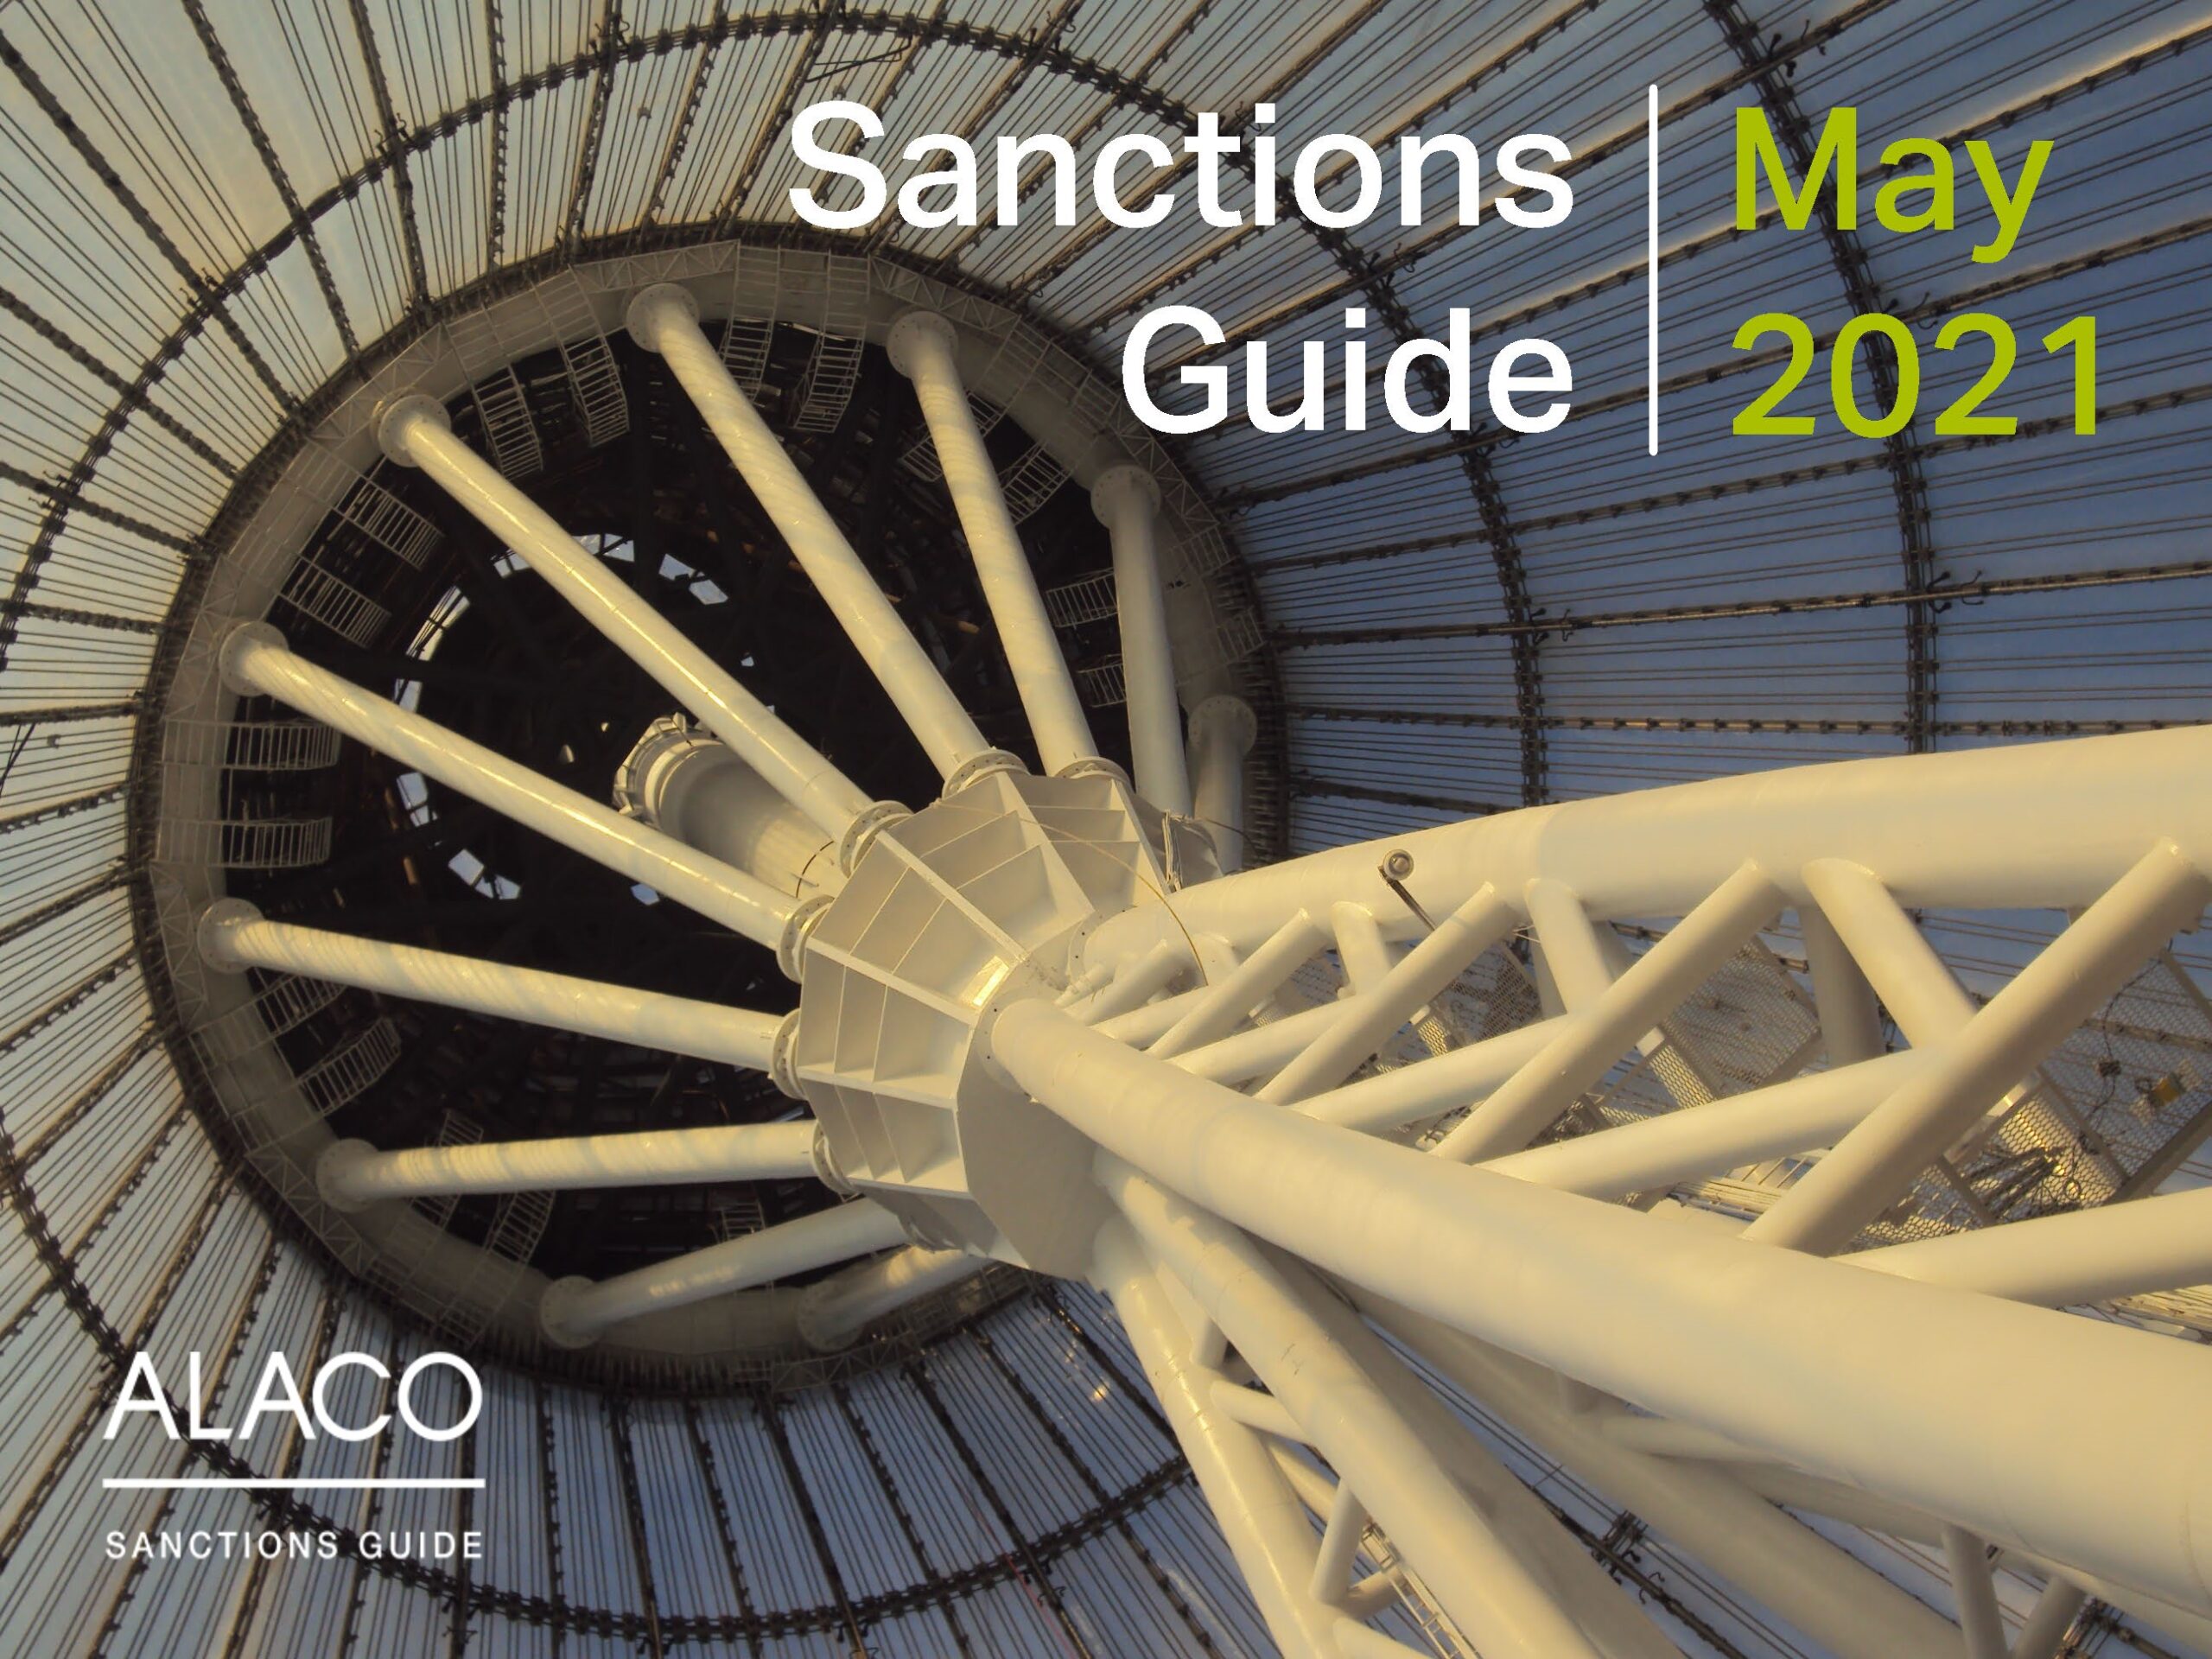 Sanctions Guide – May 2021